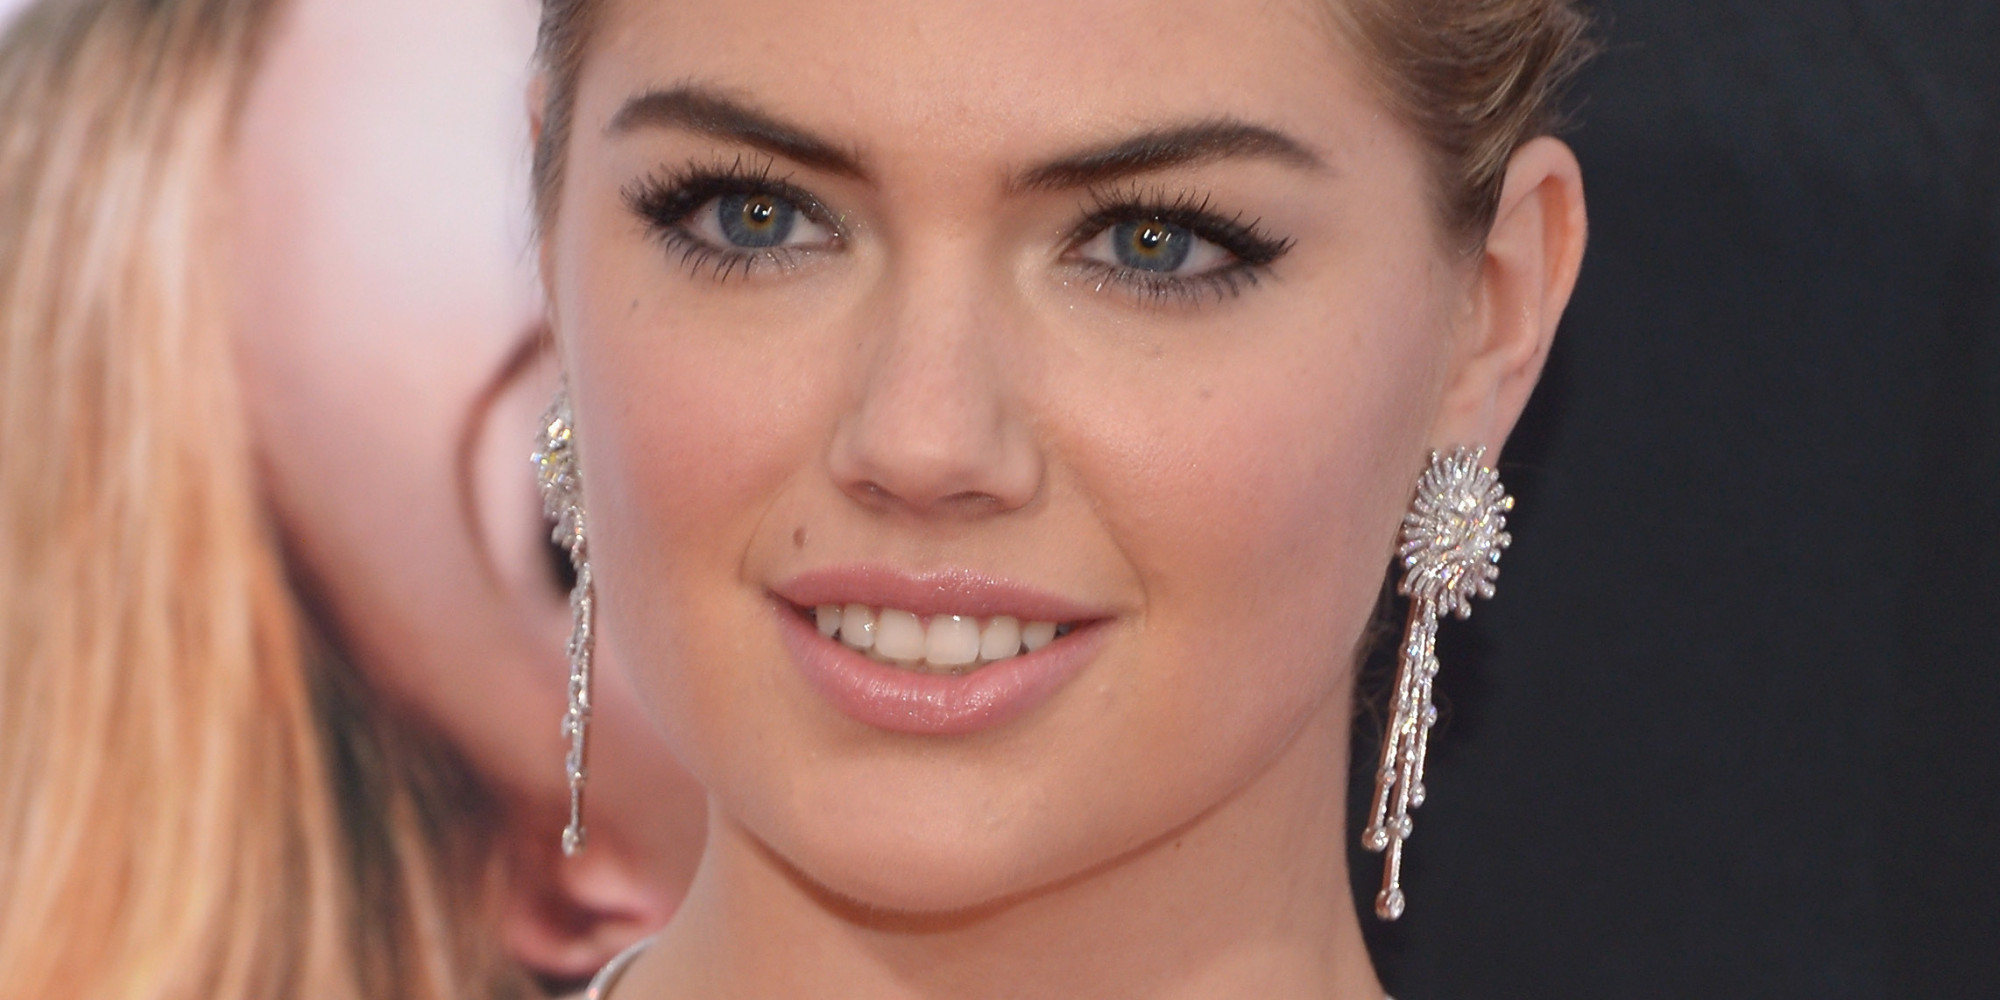 Kate Upton's Best Friend Is Self-Proclaimed 'Bachelor' Reject Lucy Aragon | HuffPost